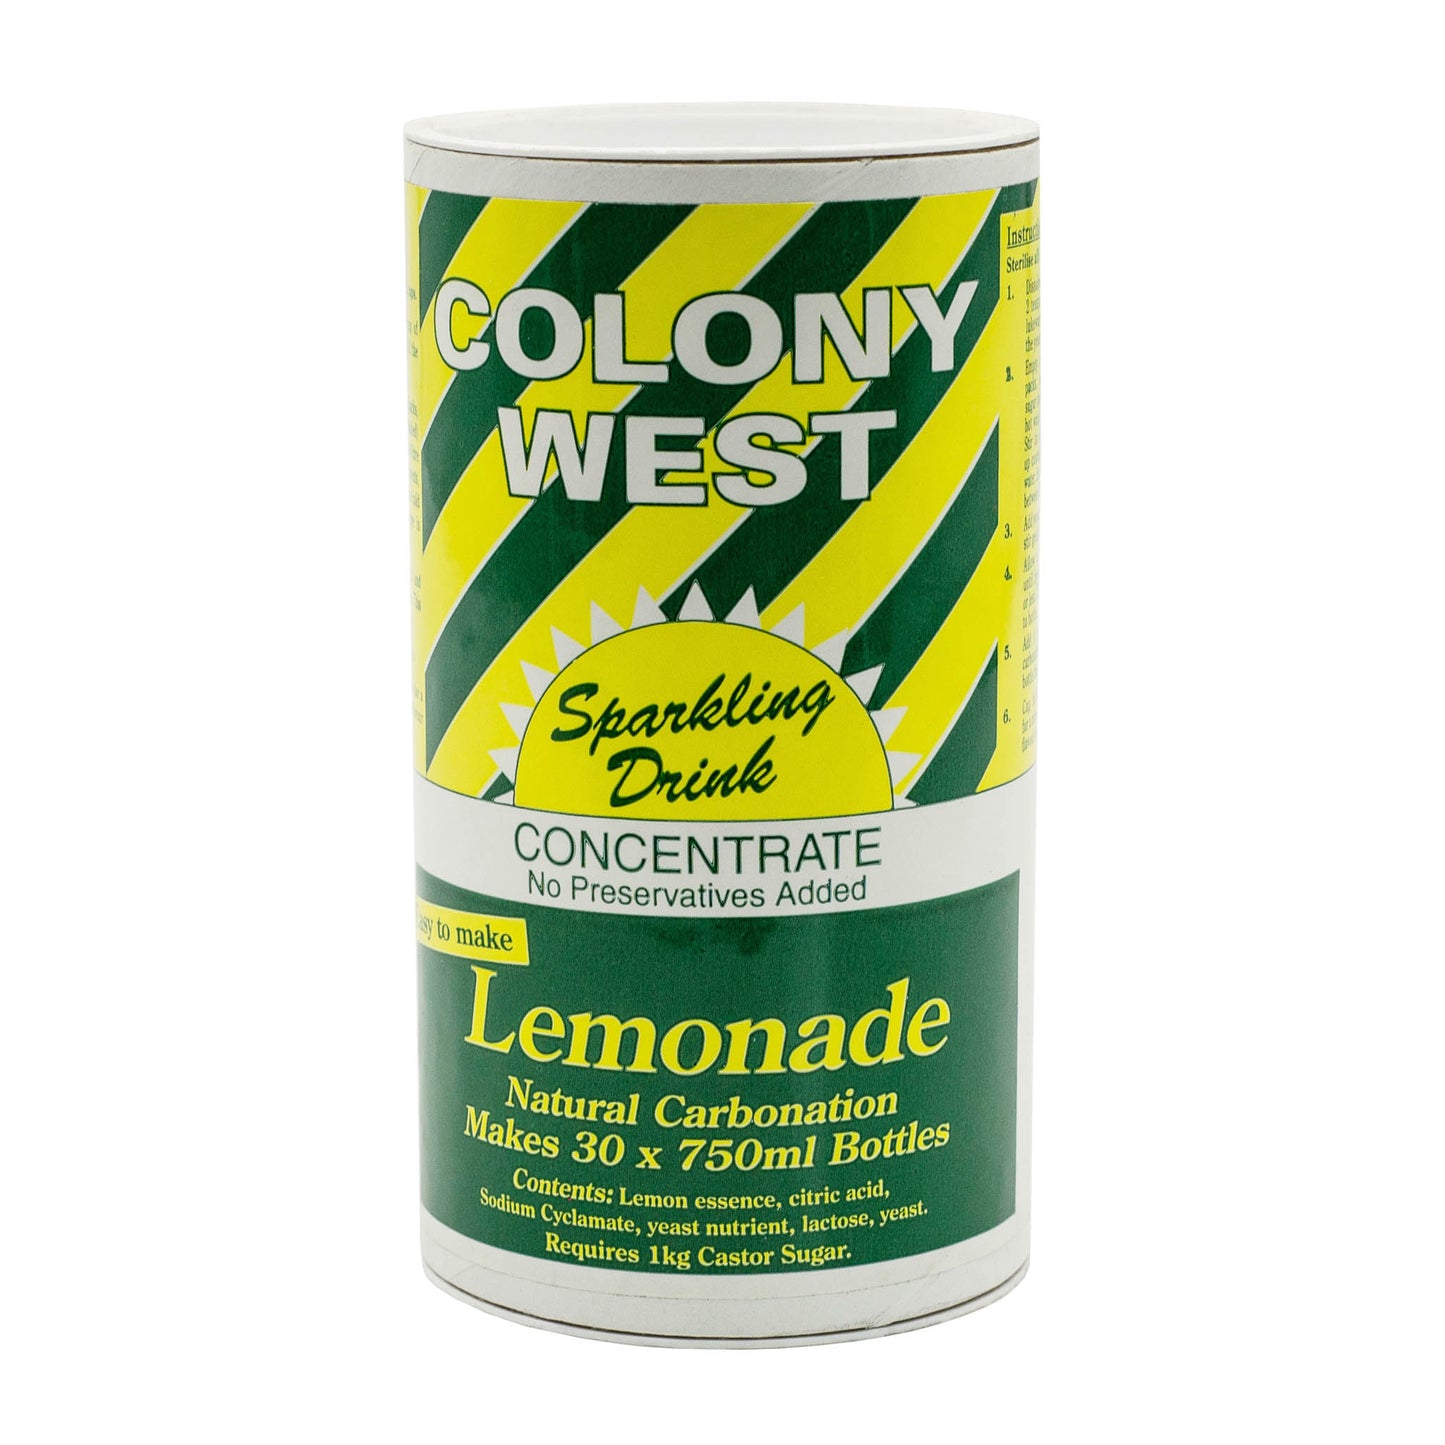 Colony west lemonade concentrate brew tin. Makes up to 23 litres. 